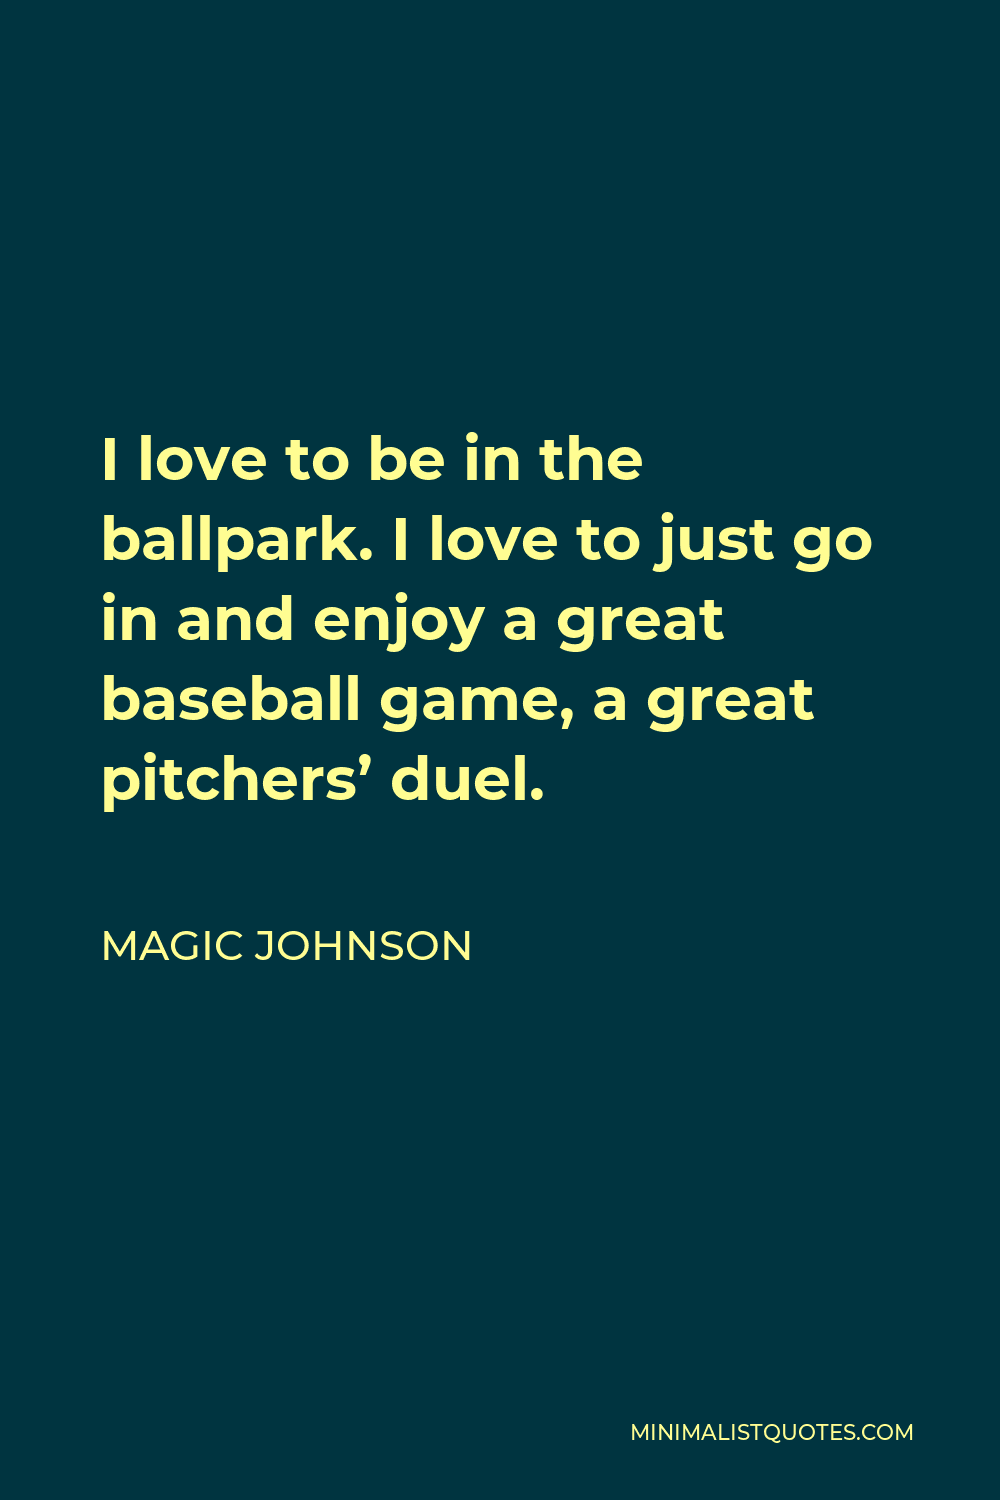 Magic Johnson Quote - I love to be in the ballpark. I love to just go in and enjoy a great baseball game, a great pitchers’ duel.